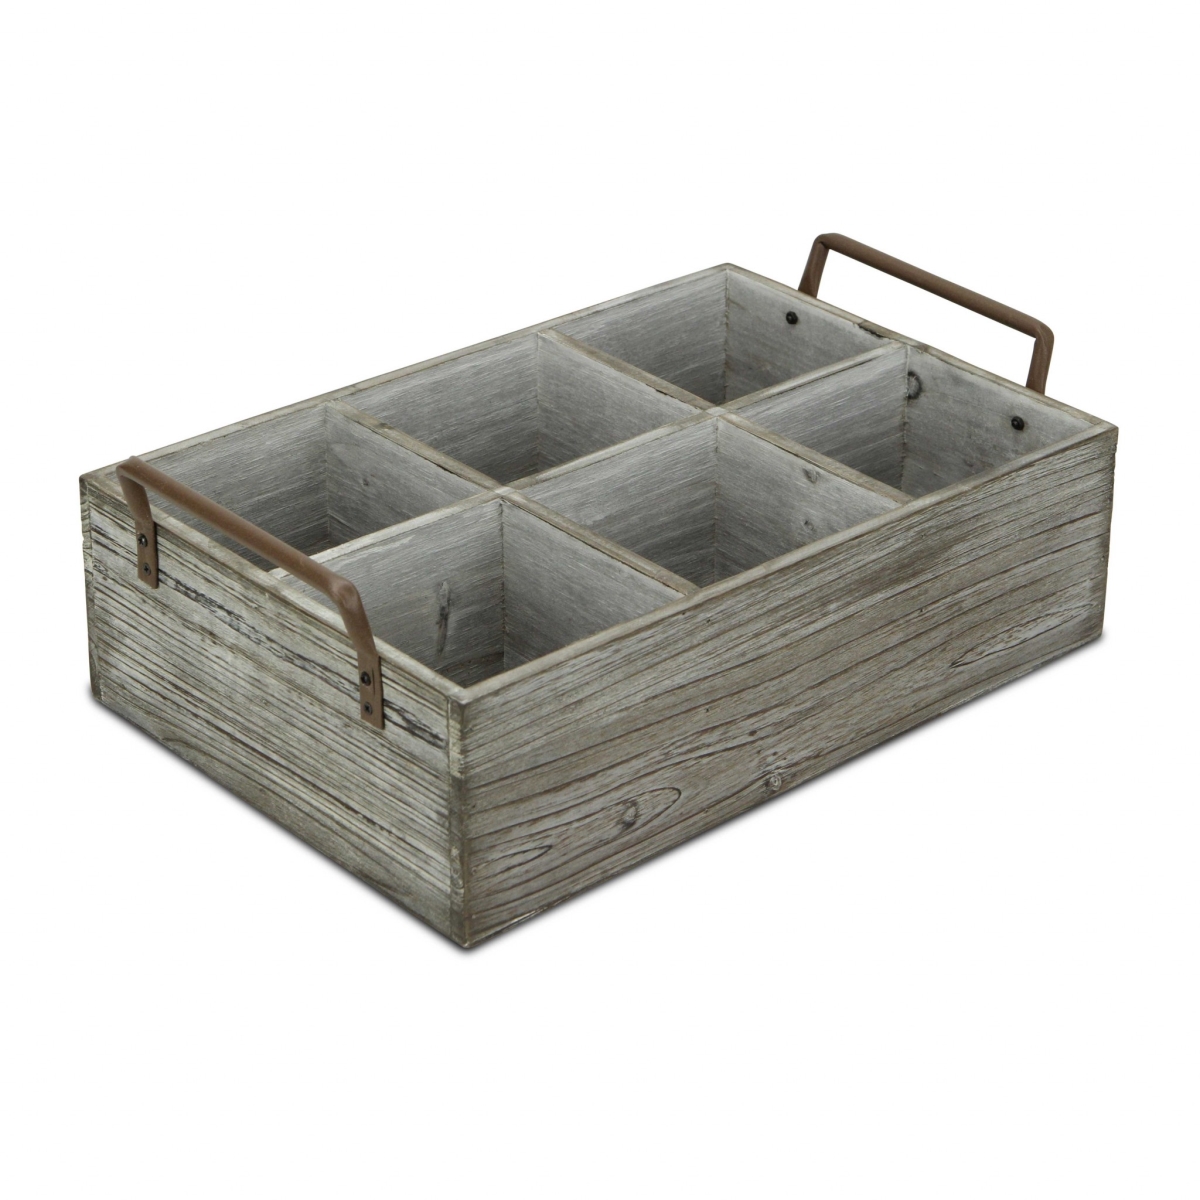 Picture of HomeRoots 399662 5.25 x 15 x 9.25 in. Rustic Gray Wash Six Slot Wooden Caddy